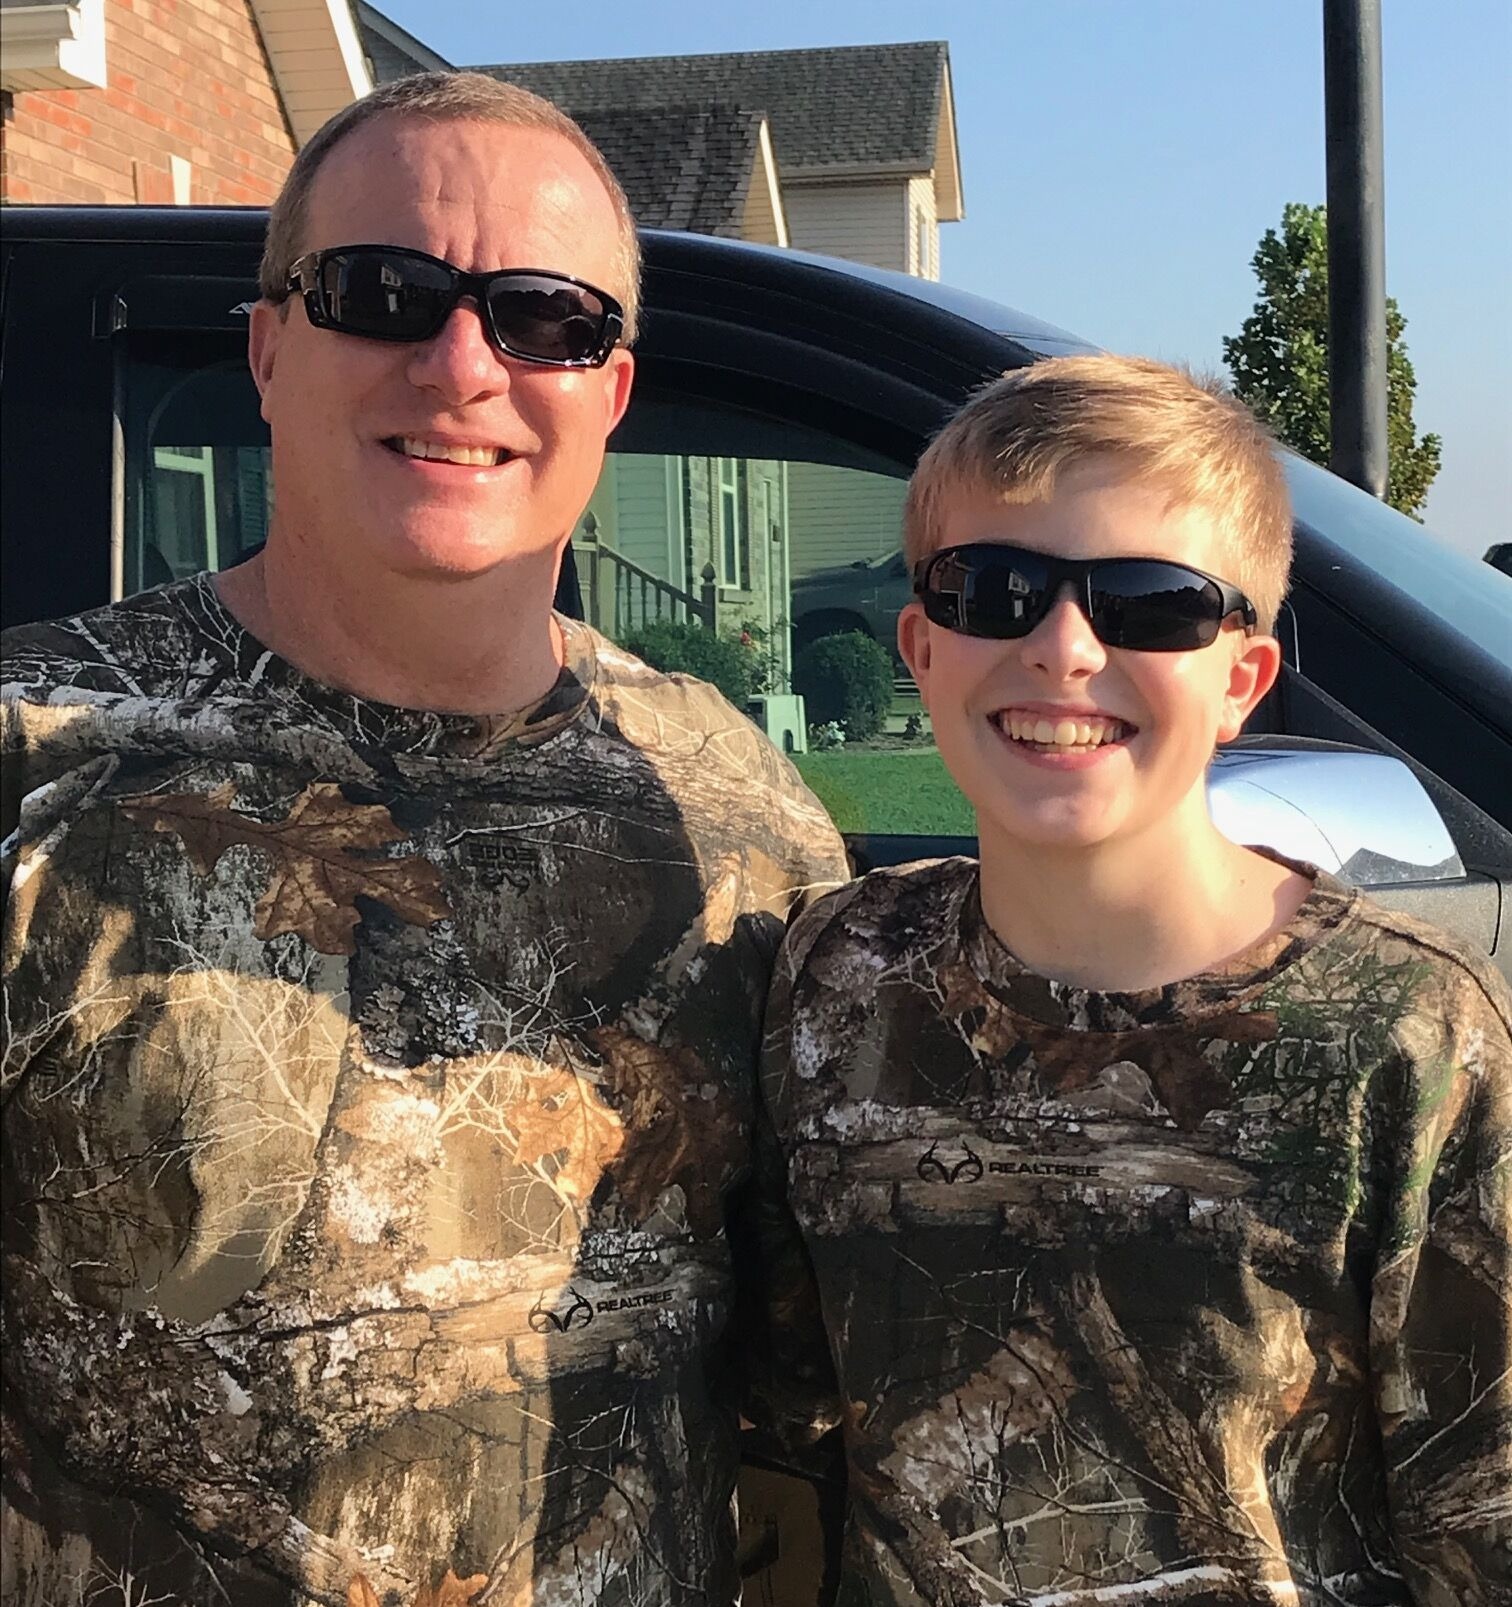 Father and son begin a new tradition of hunting on their own after participating in Tennessee Wildlife Federation’s Hunting and Fishing Academy.